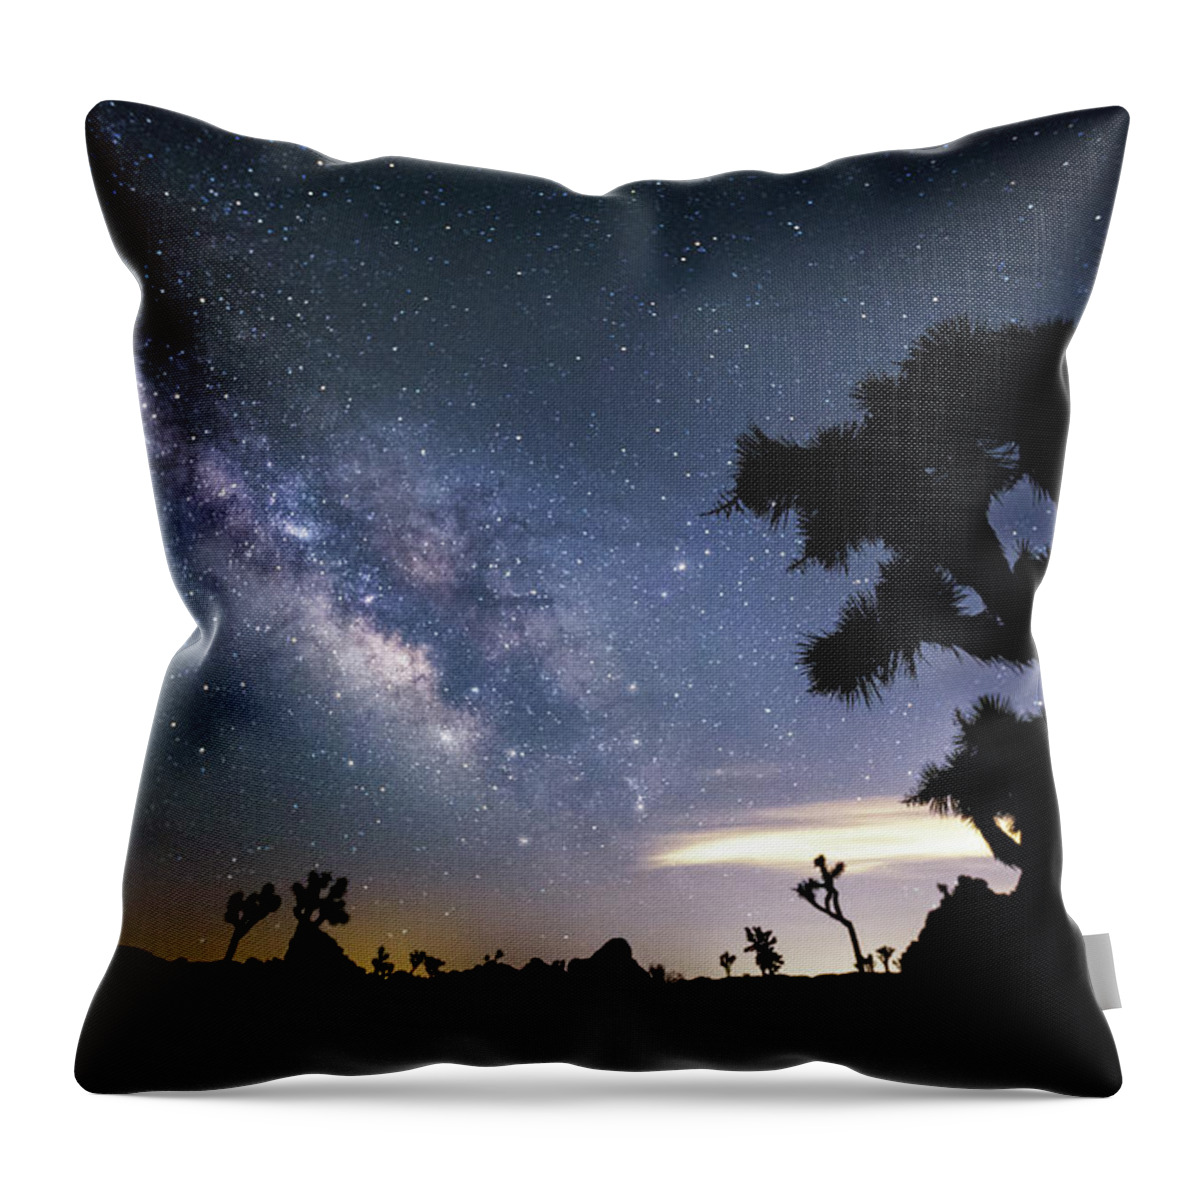 Milkyway Throw Pillow featuring the photograph Nightscape by Tassanee Angiolillo